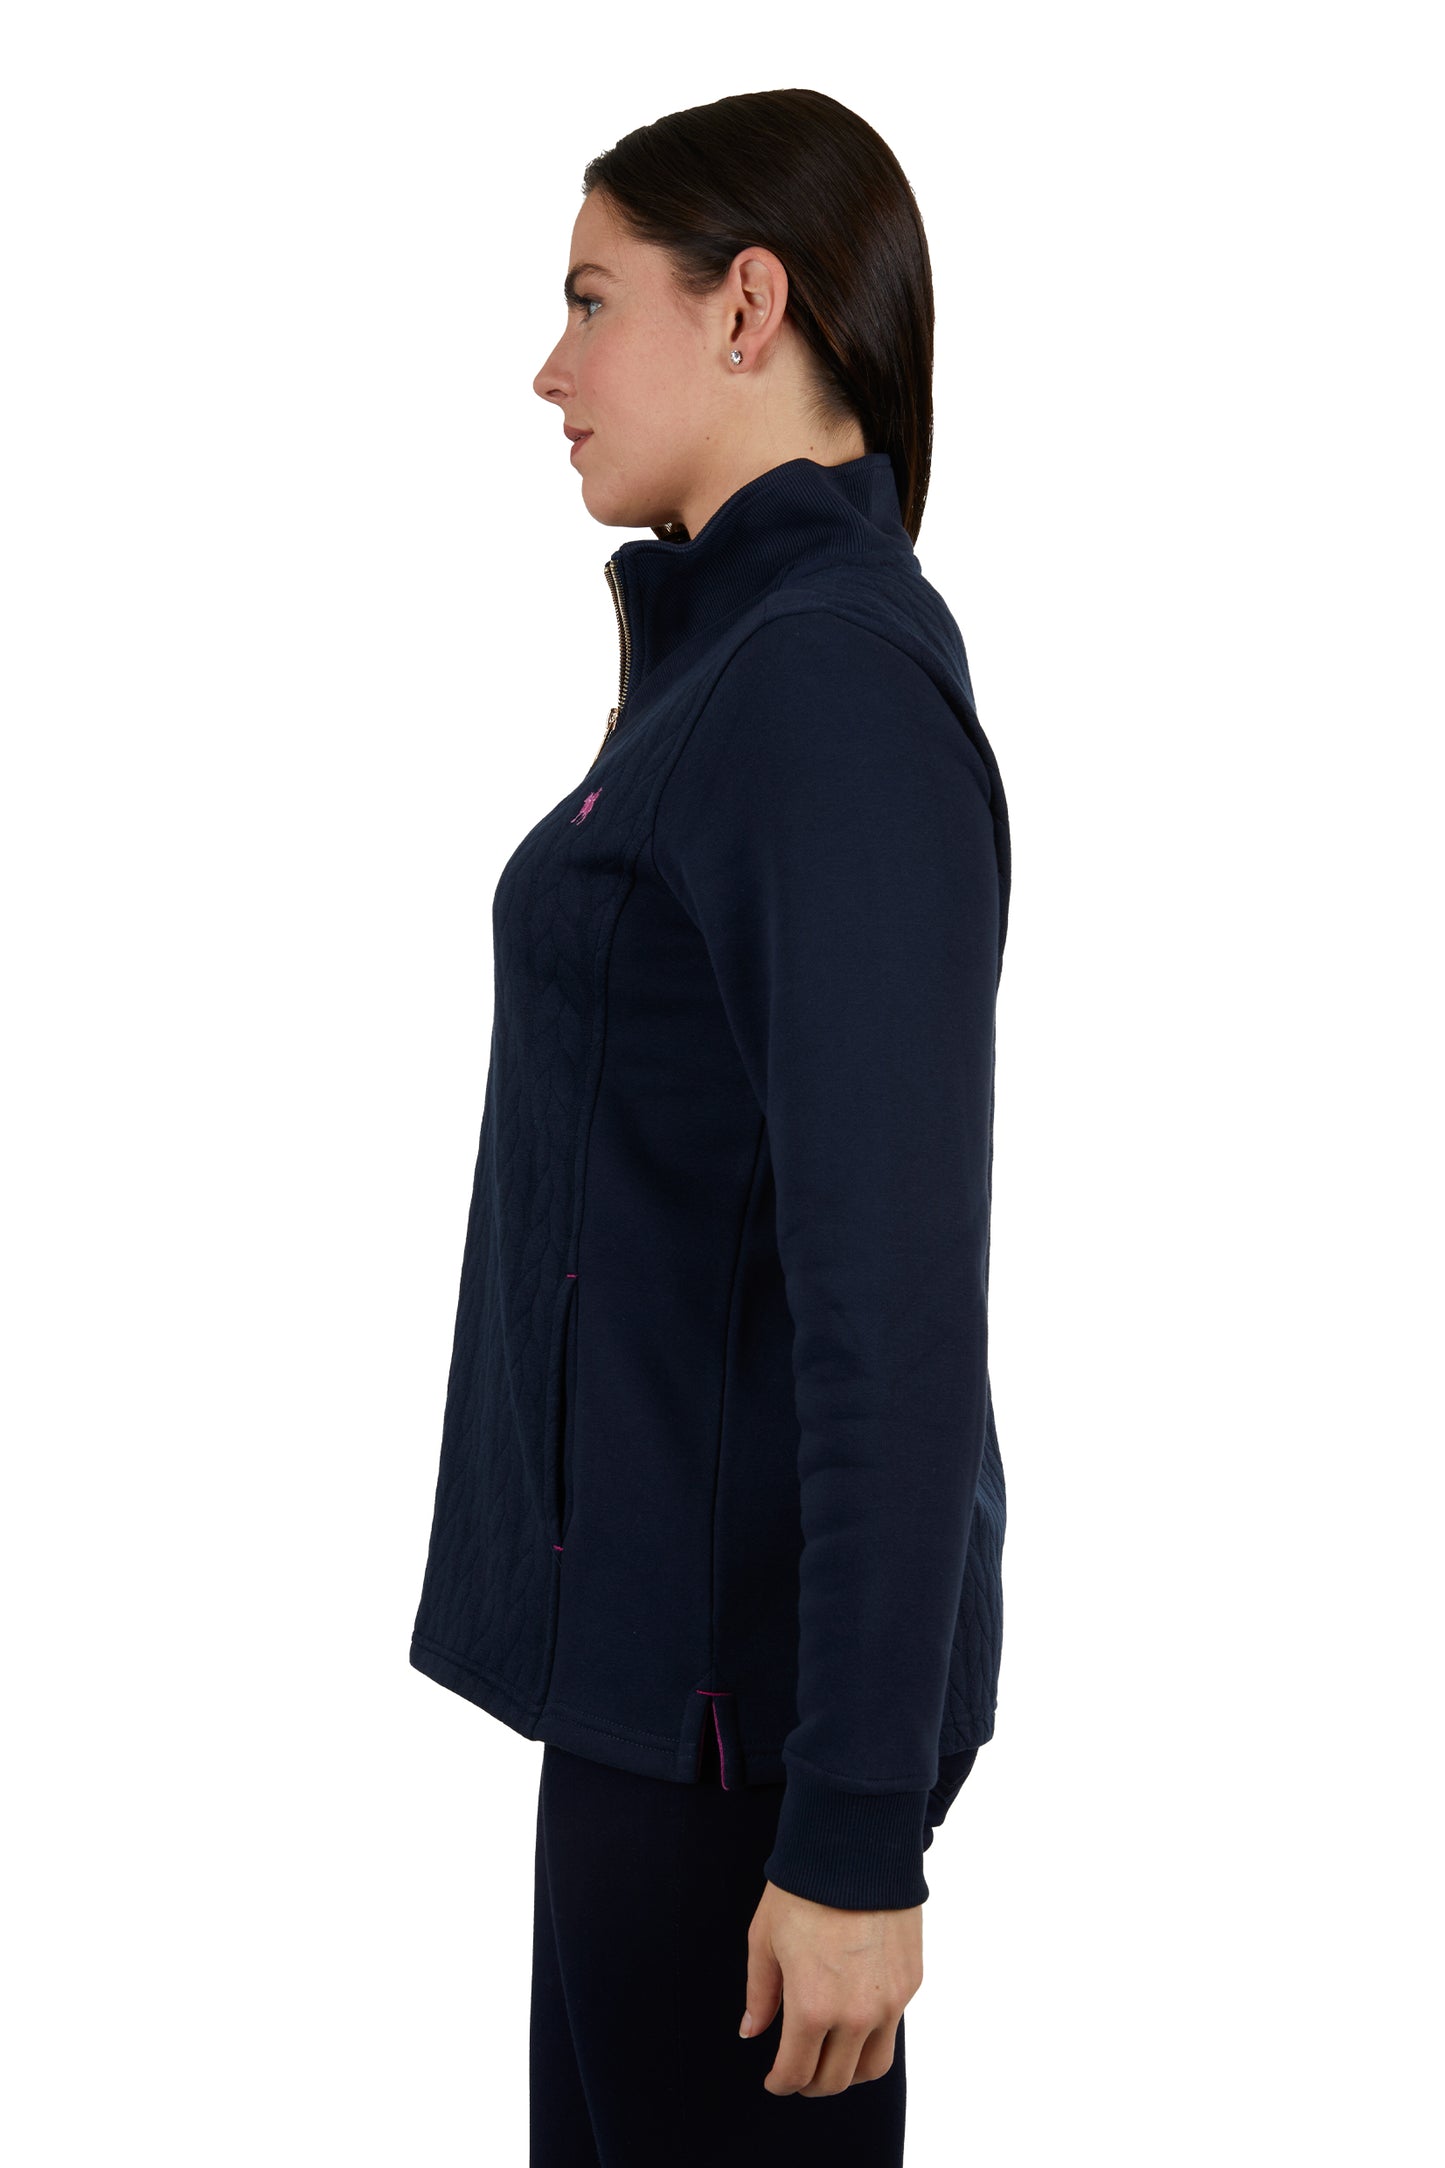 WMNS ABBY 1/4 ZIP RUGBY